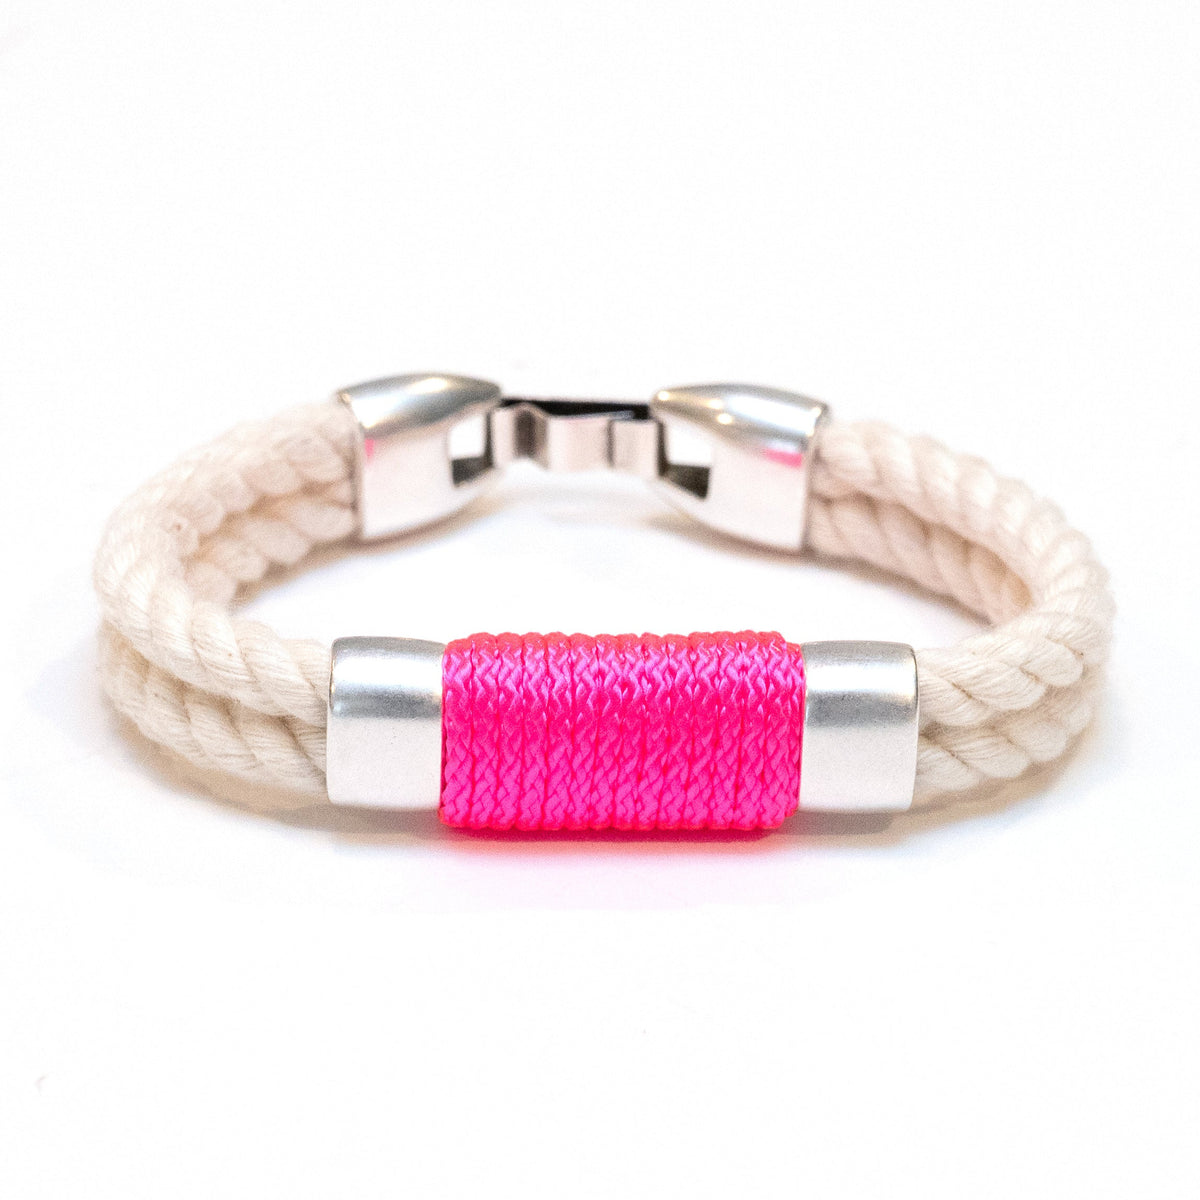 Tremont - Ivory/Neon Pink/Silver